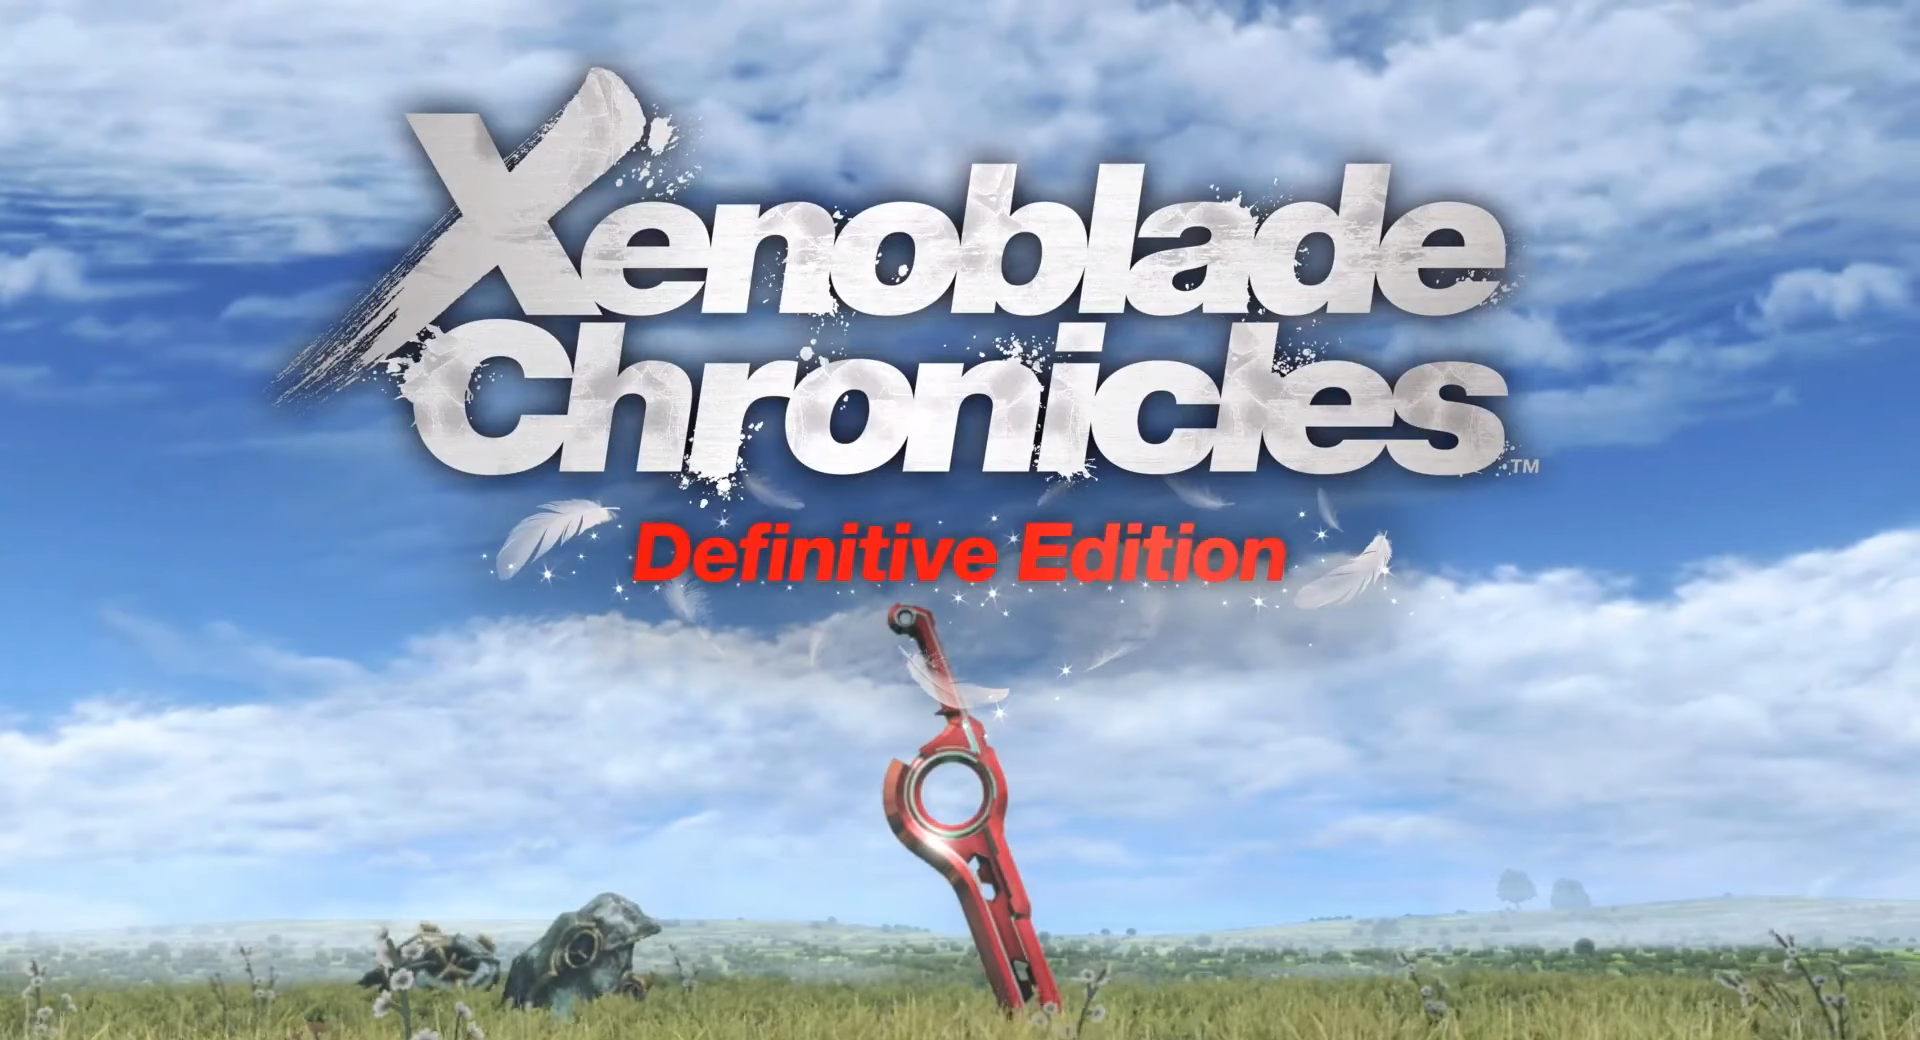 Nintendo Switch Is Getting A Xenoblade Chronicles Remaster - GameSpot